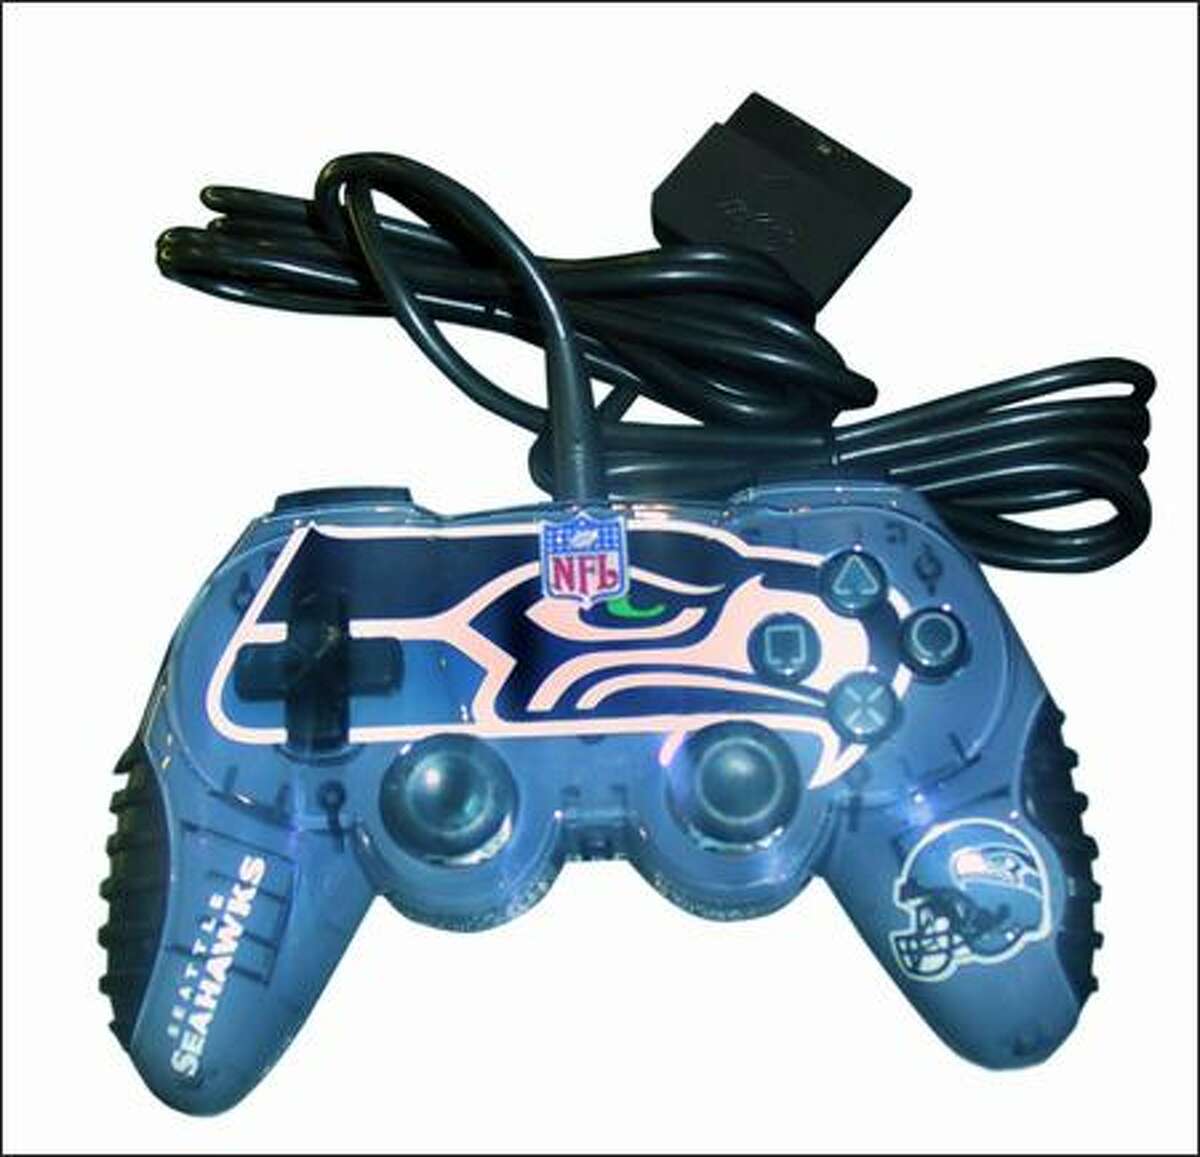 PS2 controller, $40 - "No way, that’s cool," Jim effuses. Don’t worry Xbox people, there’s a model for your system too.